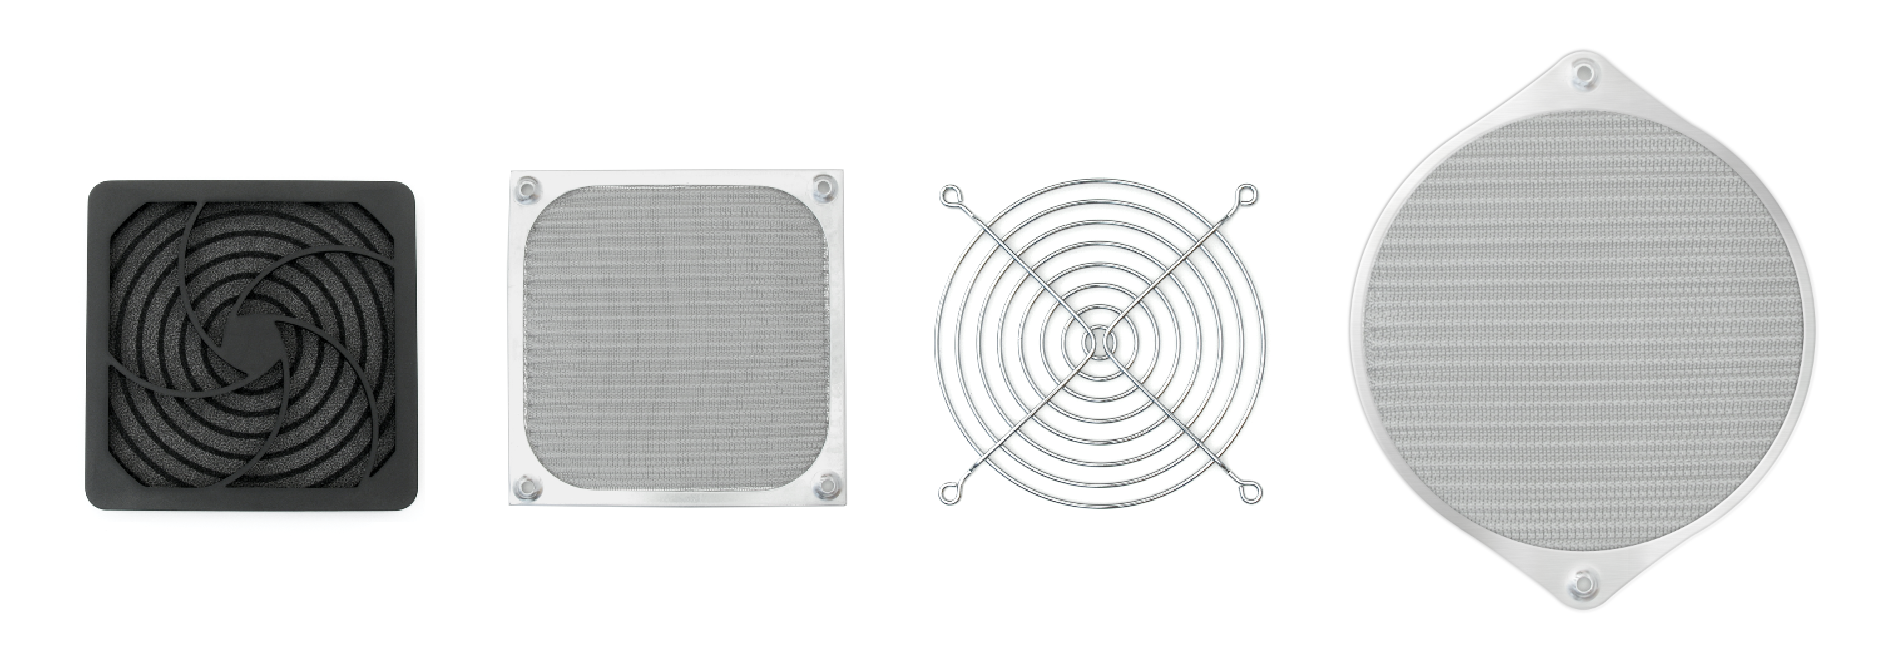 EAO Announces Launch of New Budget-Friendly Fan Accessories for Enhanced Equipment Cooling